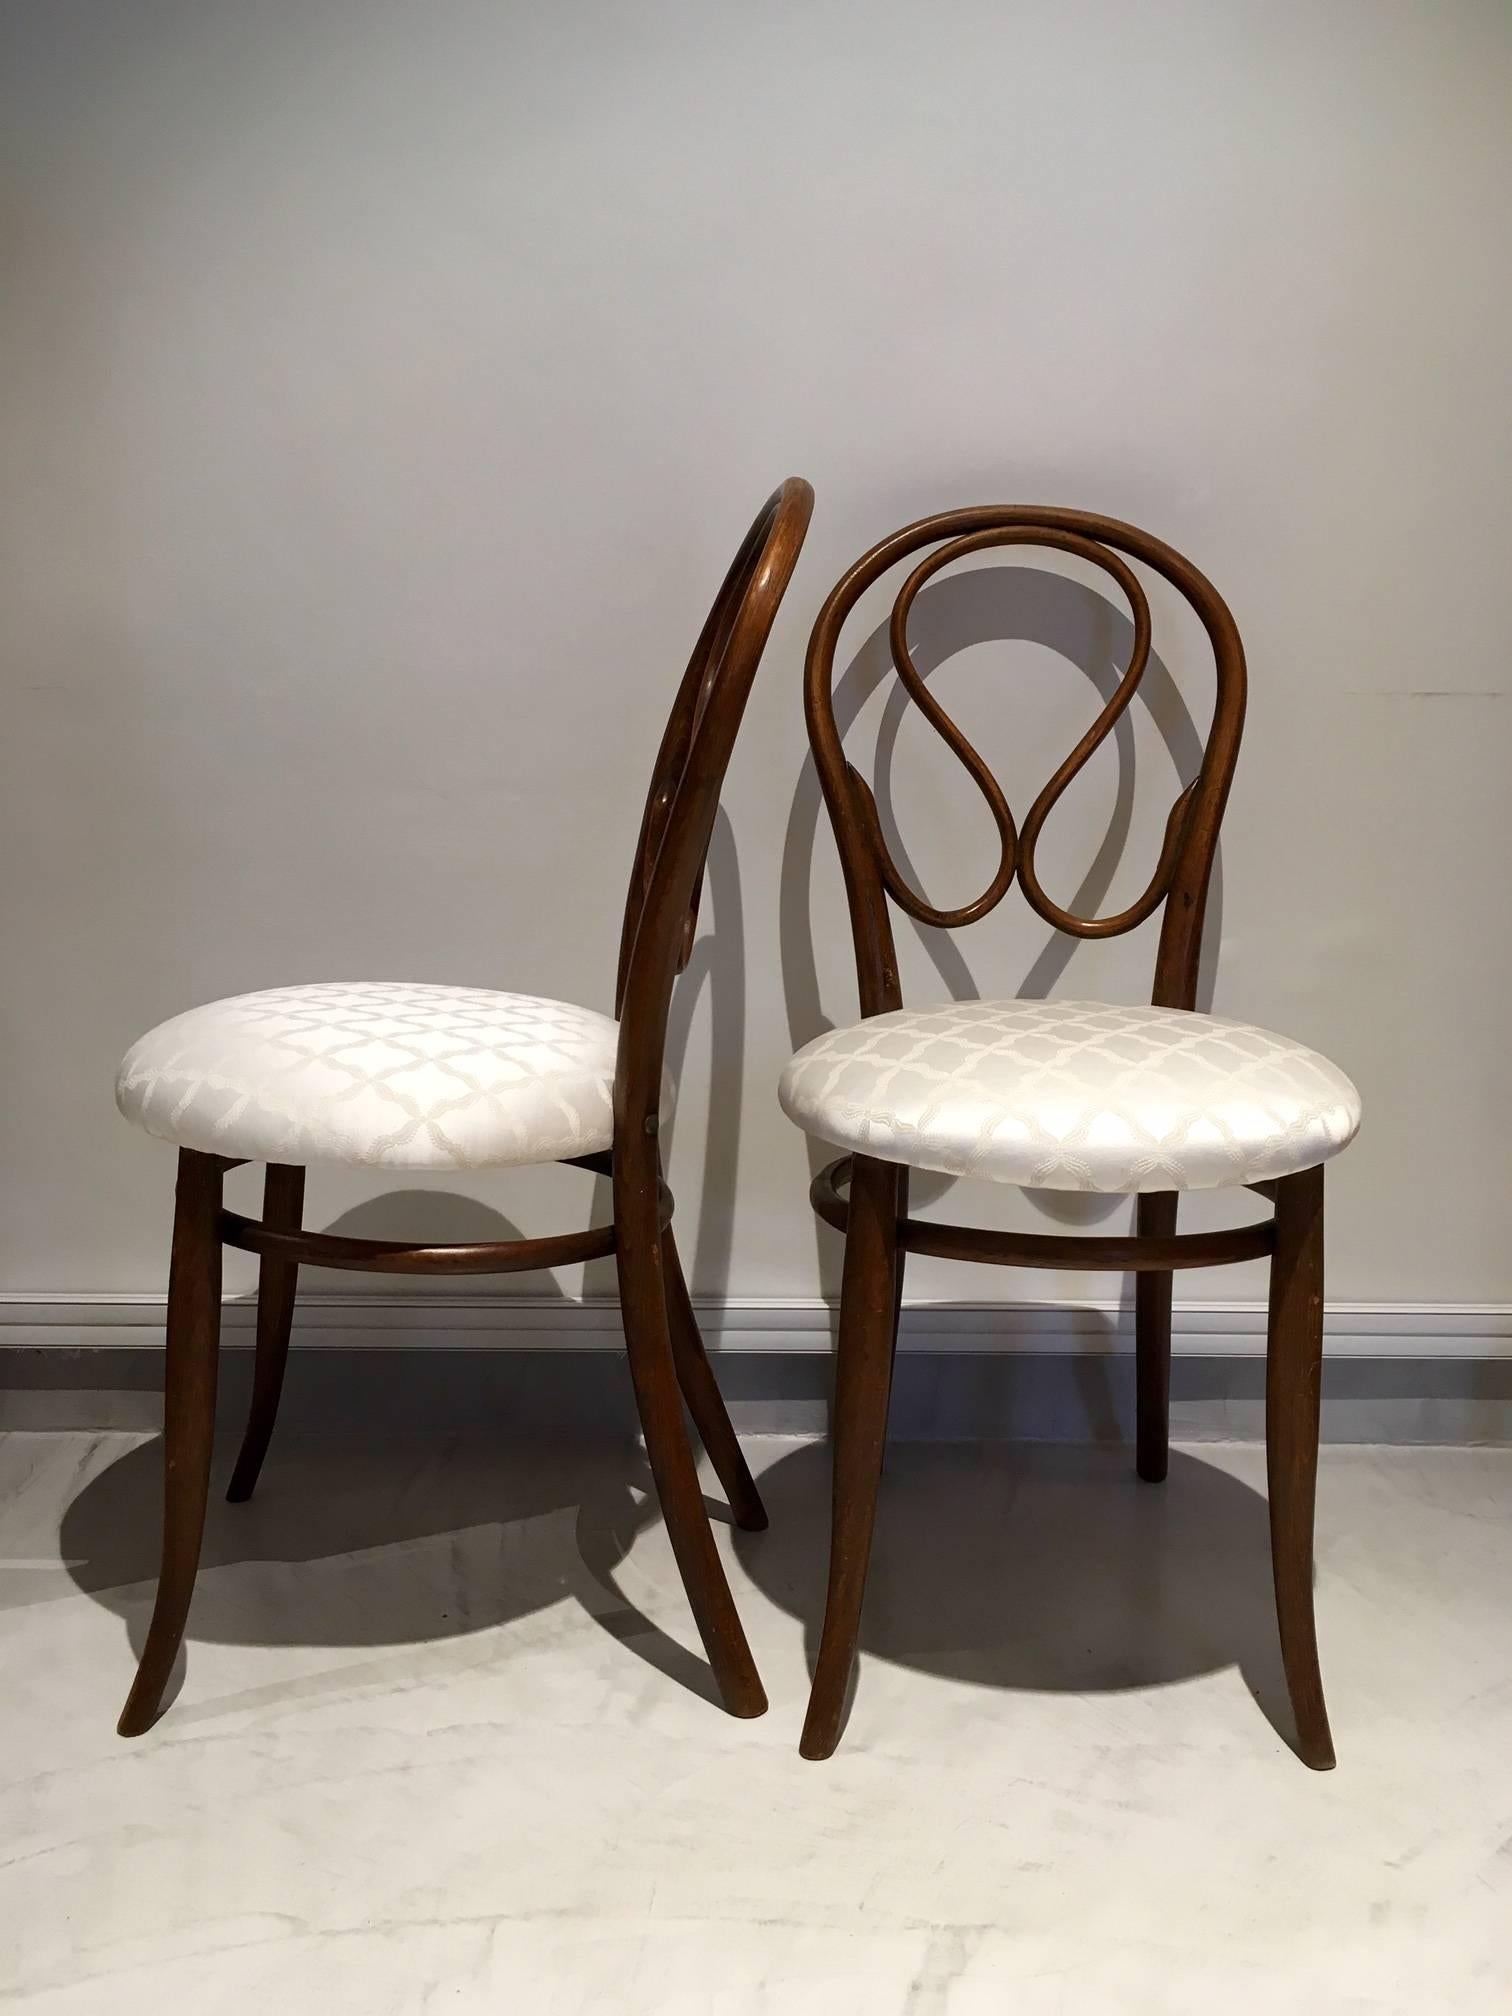 Bentwood chairs with new silk-blend seat upholstery. Chairs designed by August Thonet, the son of original bentwood furniture designer Michael Thonet. August took over his father's business in 1869.